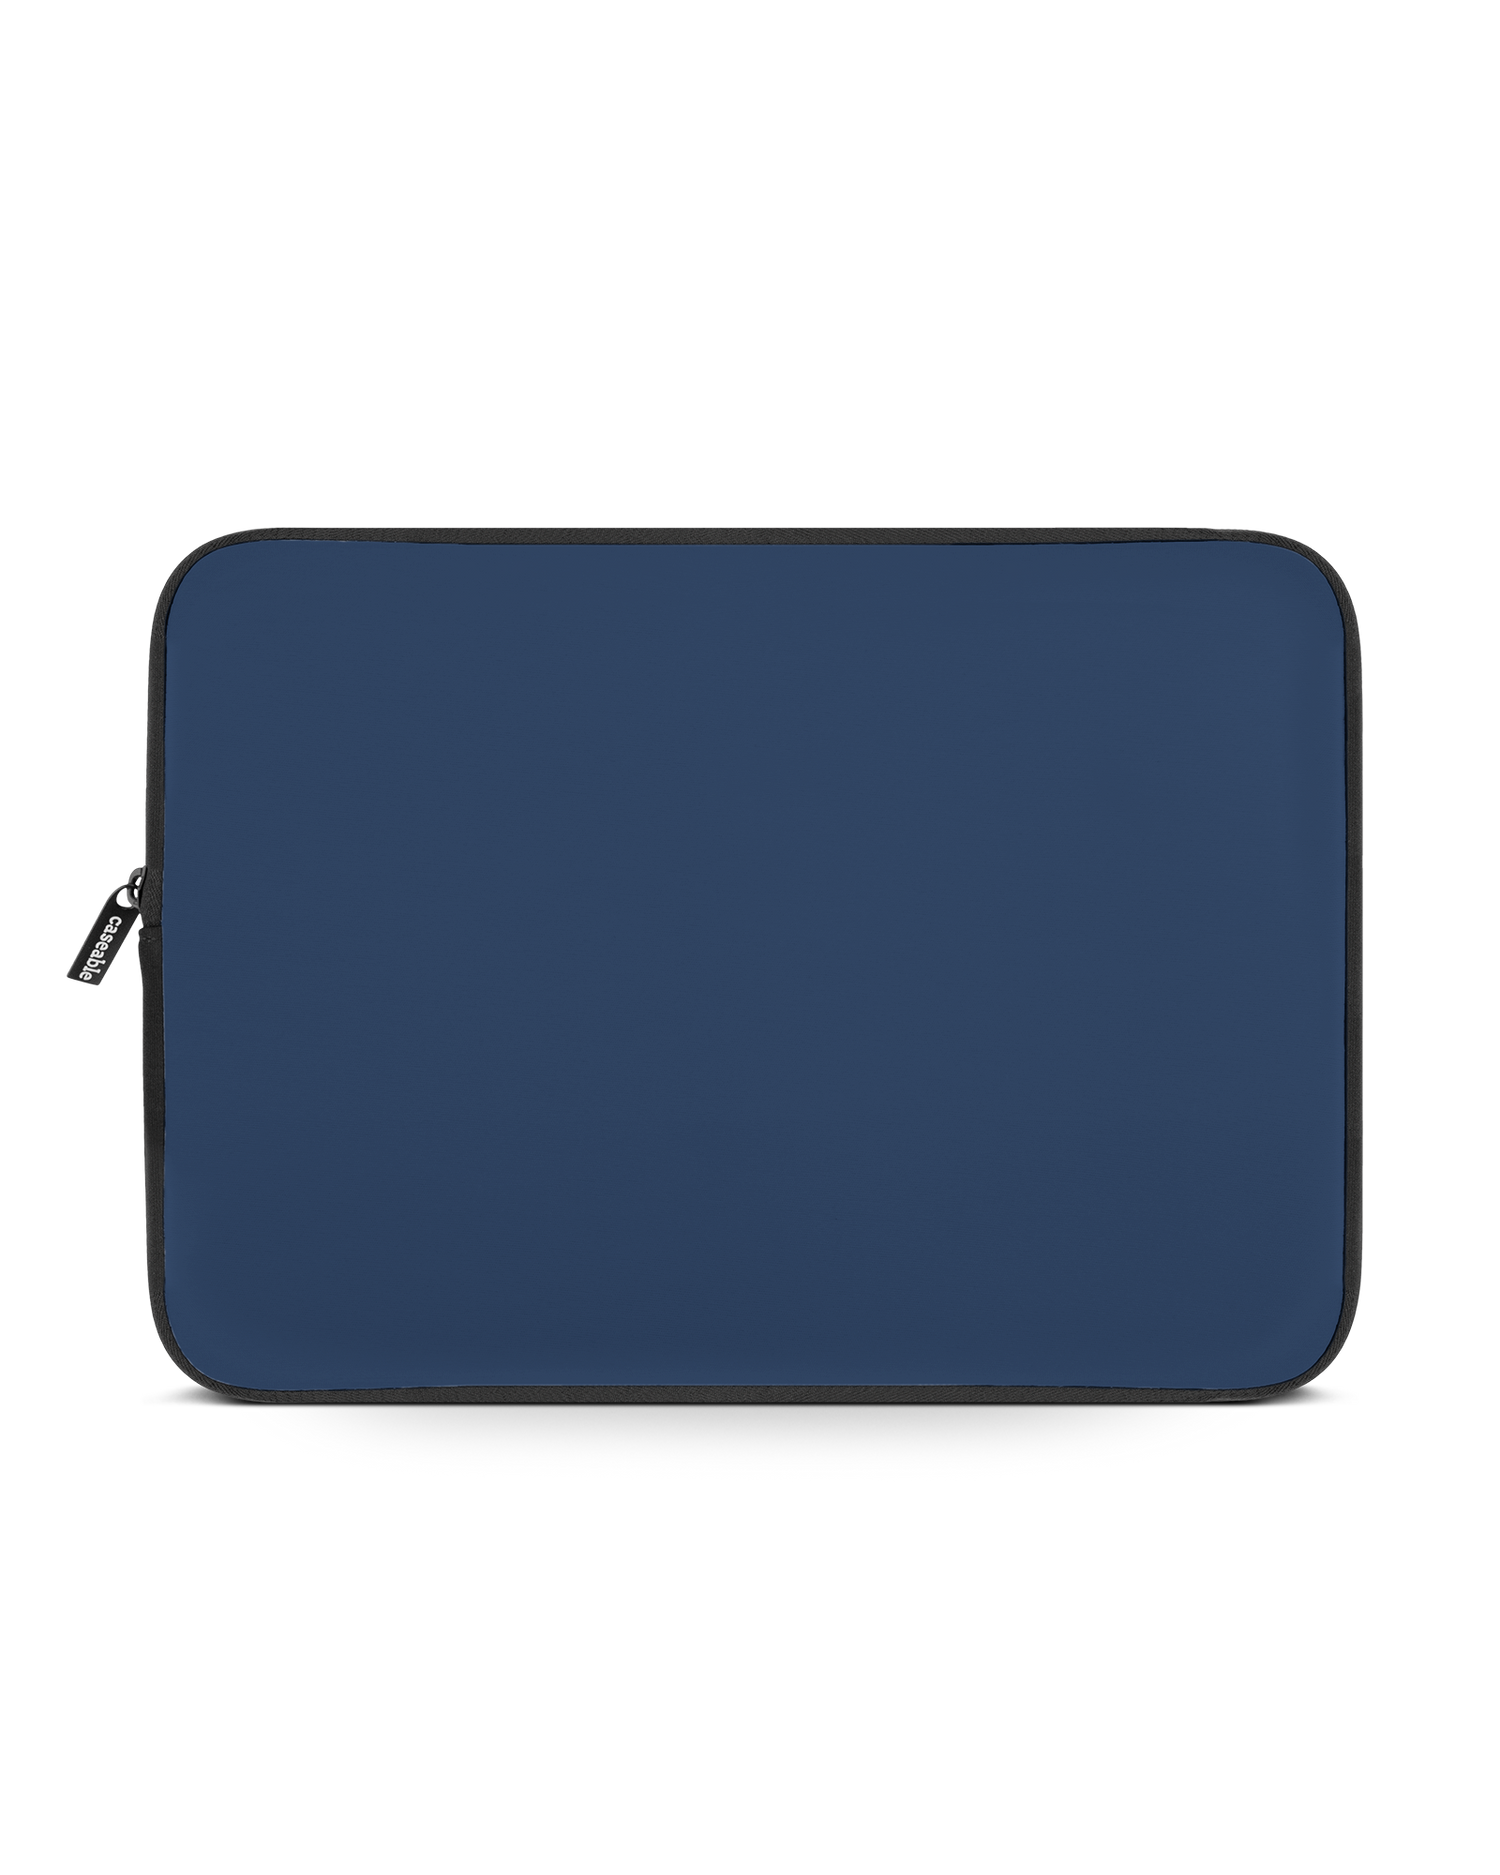 NAVY Laptop Case 14-15 inch: Front View